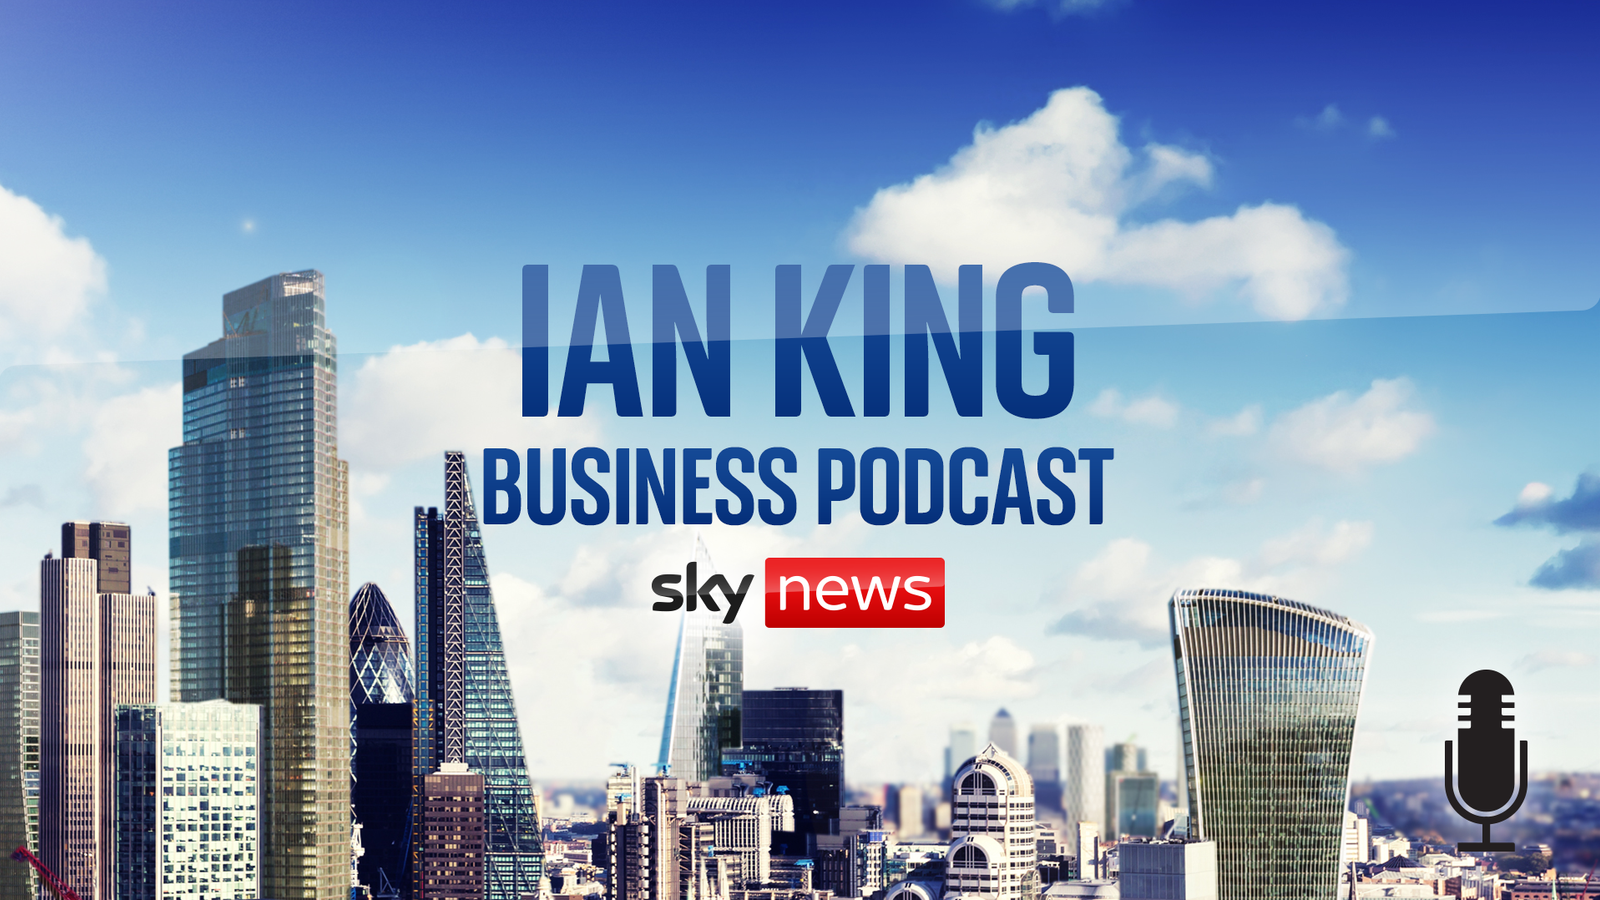 Ian King Business Podcast: Fashion, the tourist tax, and European investment